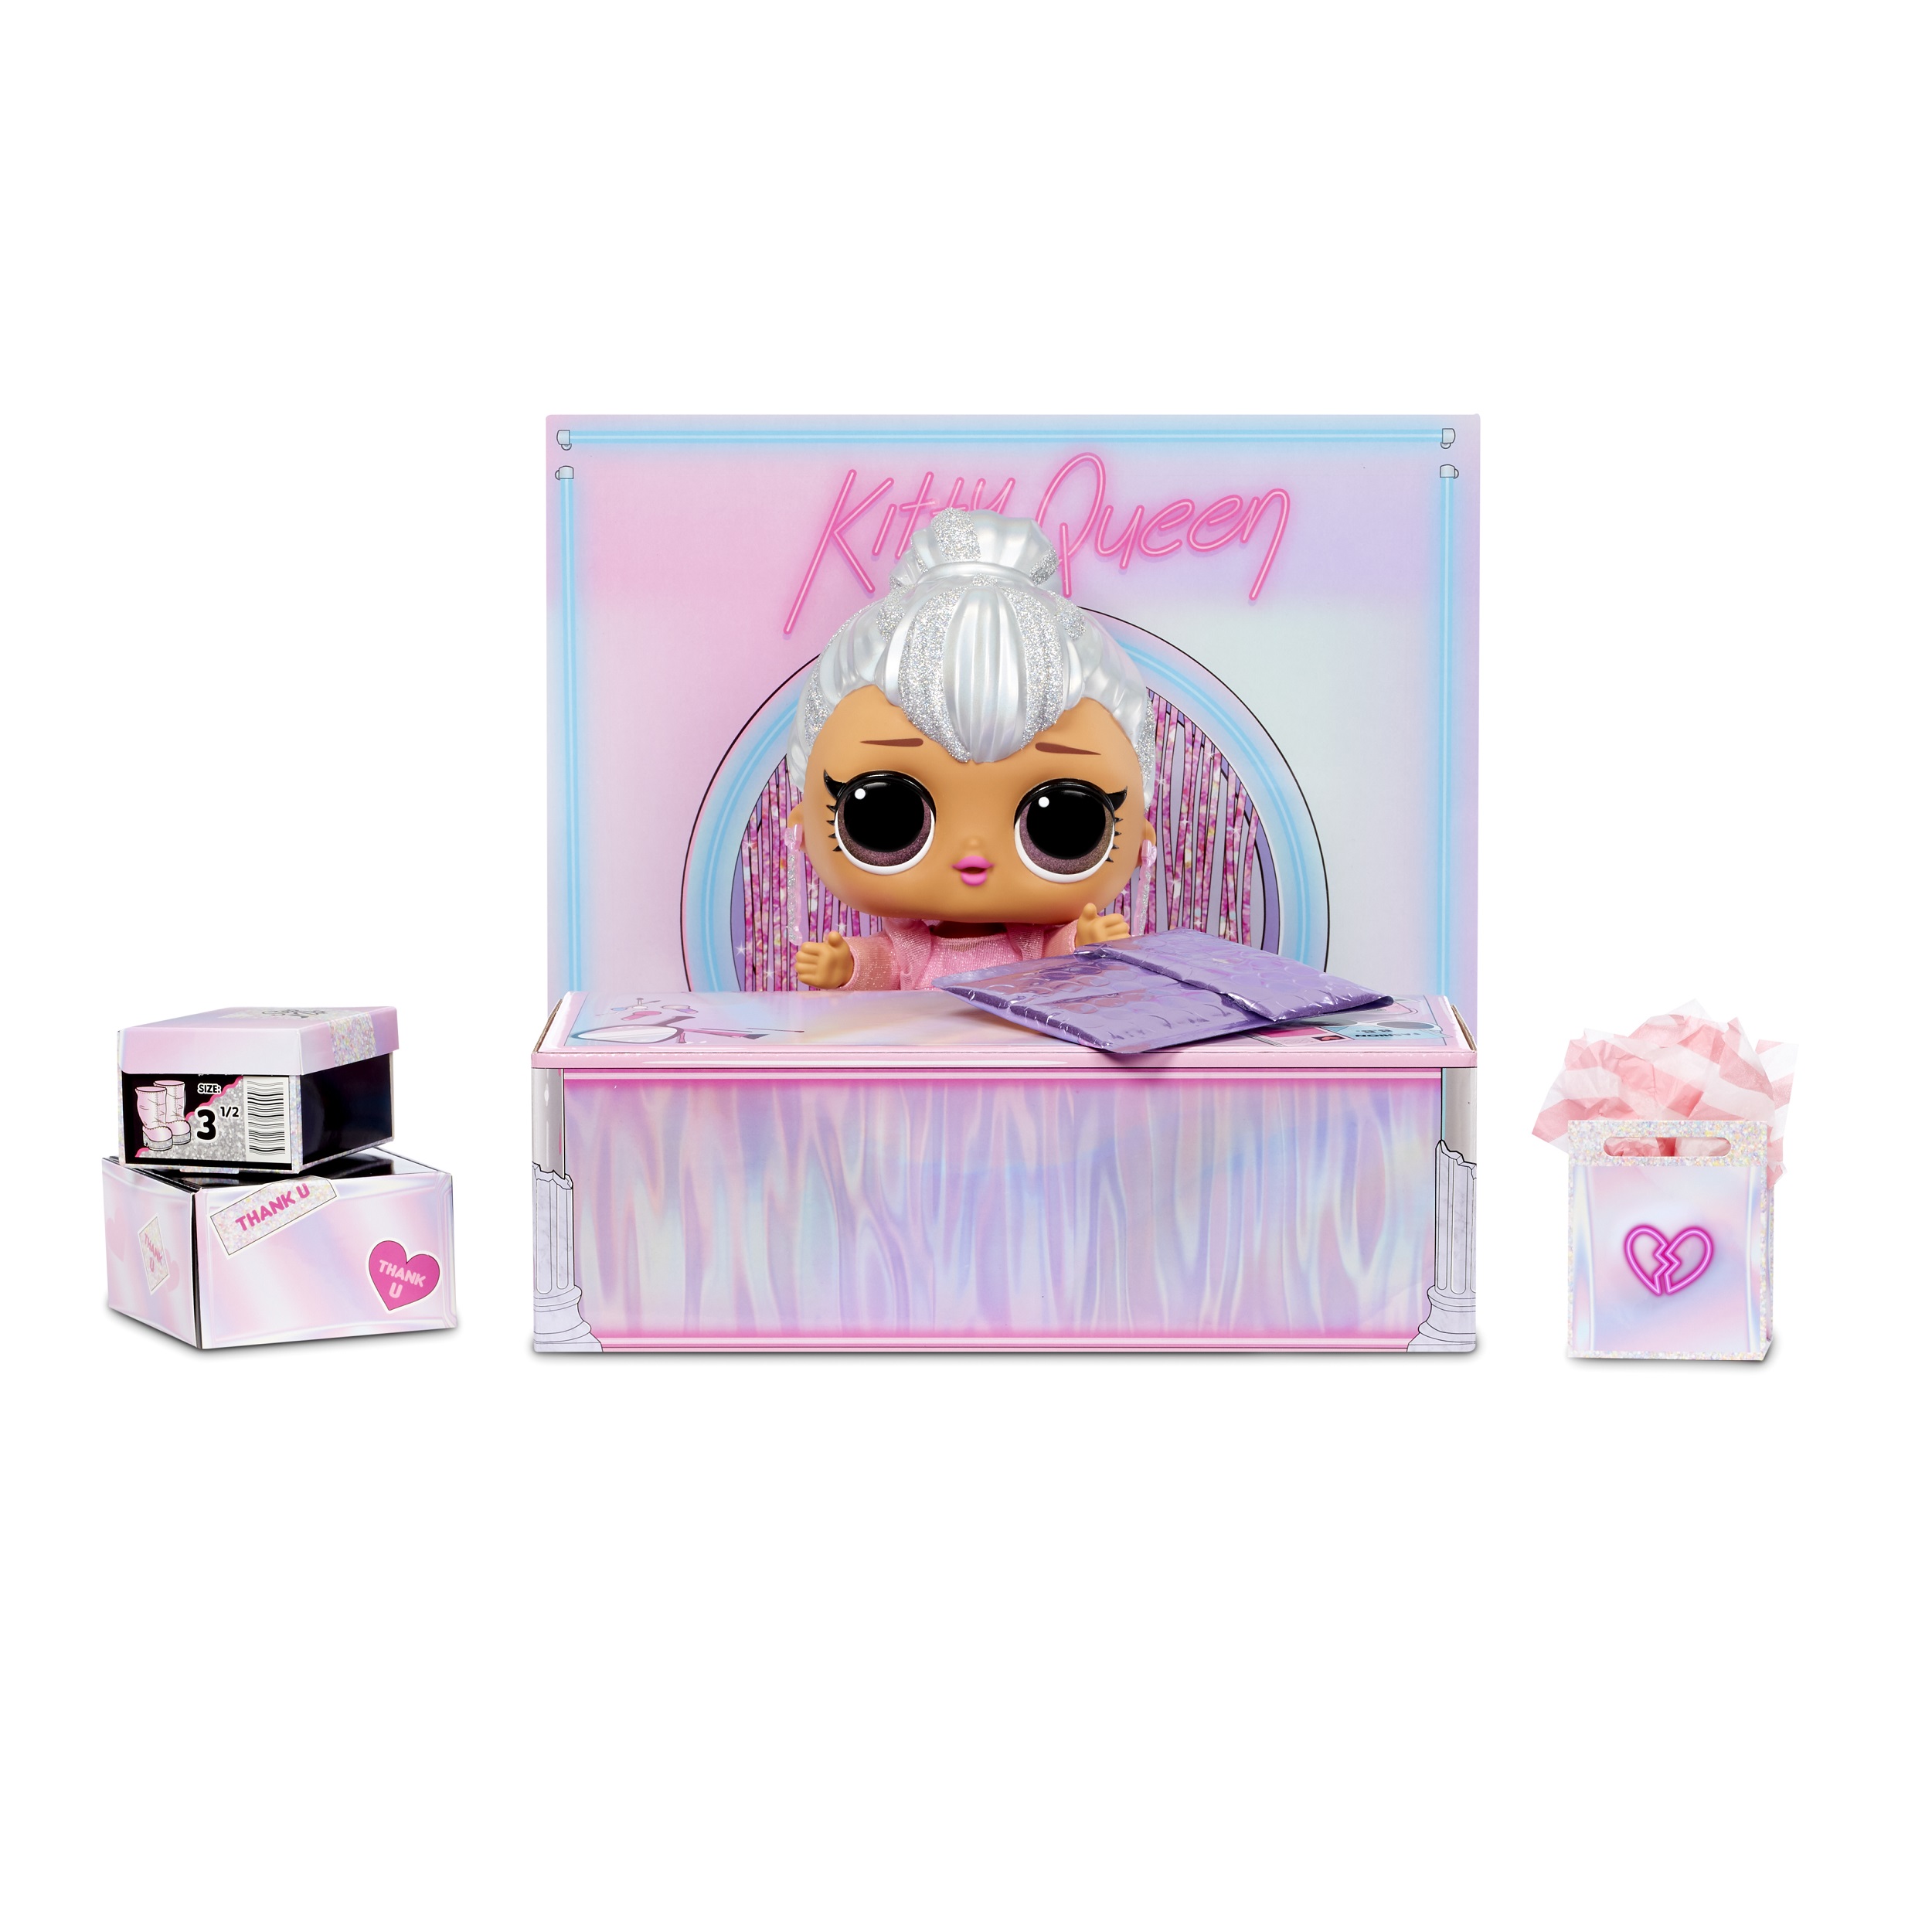 LOL Surprise Big B.B. (Big Baby) Kitty Queen – 12" Large Doll, Unbox Fashions, Shoes, Accessories, Includes Playset Desk, Chair and Backdrop - image 4 of 7